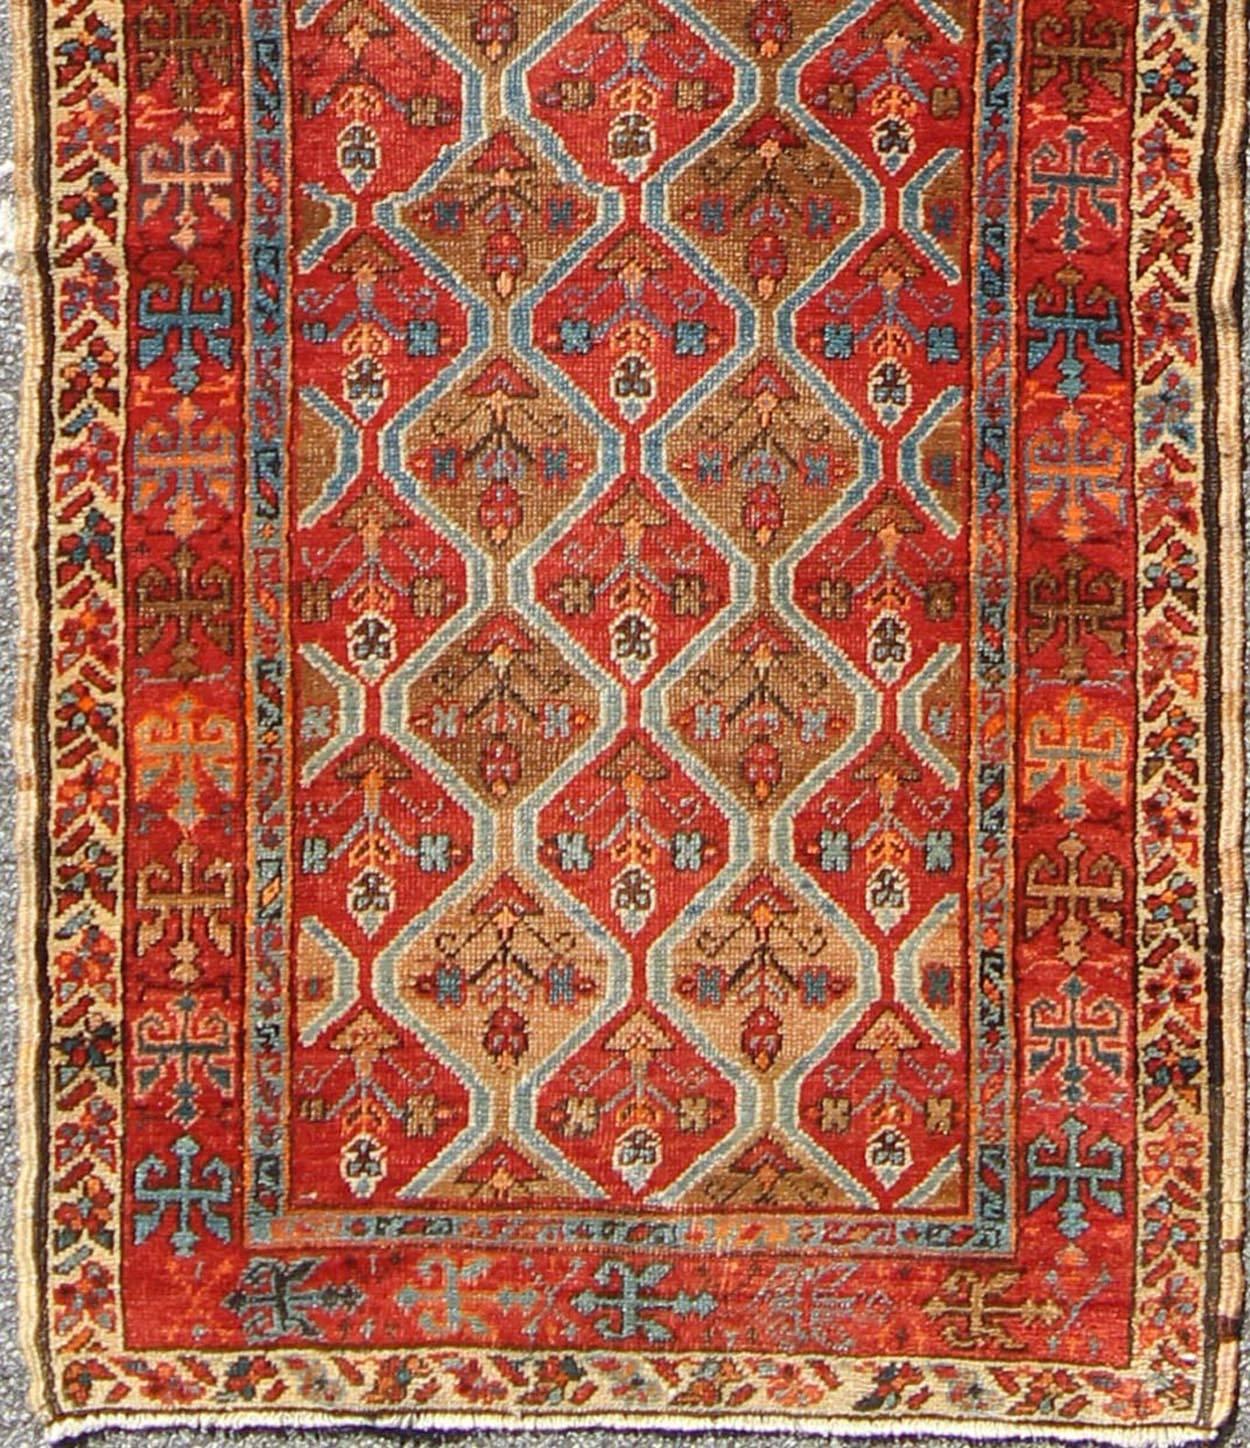 Measures: 2'10'' x 10'9''.
This antique Serapi-Heriz displays a charming and rich combination of various jewel tones. The geometric diamond shapes are repeated in different forms and colors throughout the background while the border repeats a motif